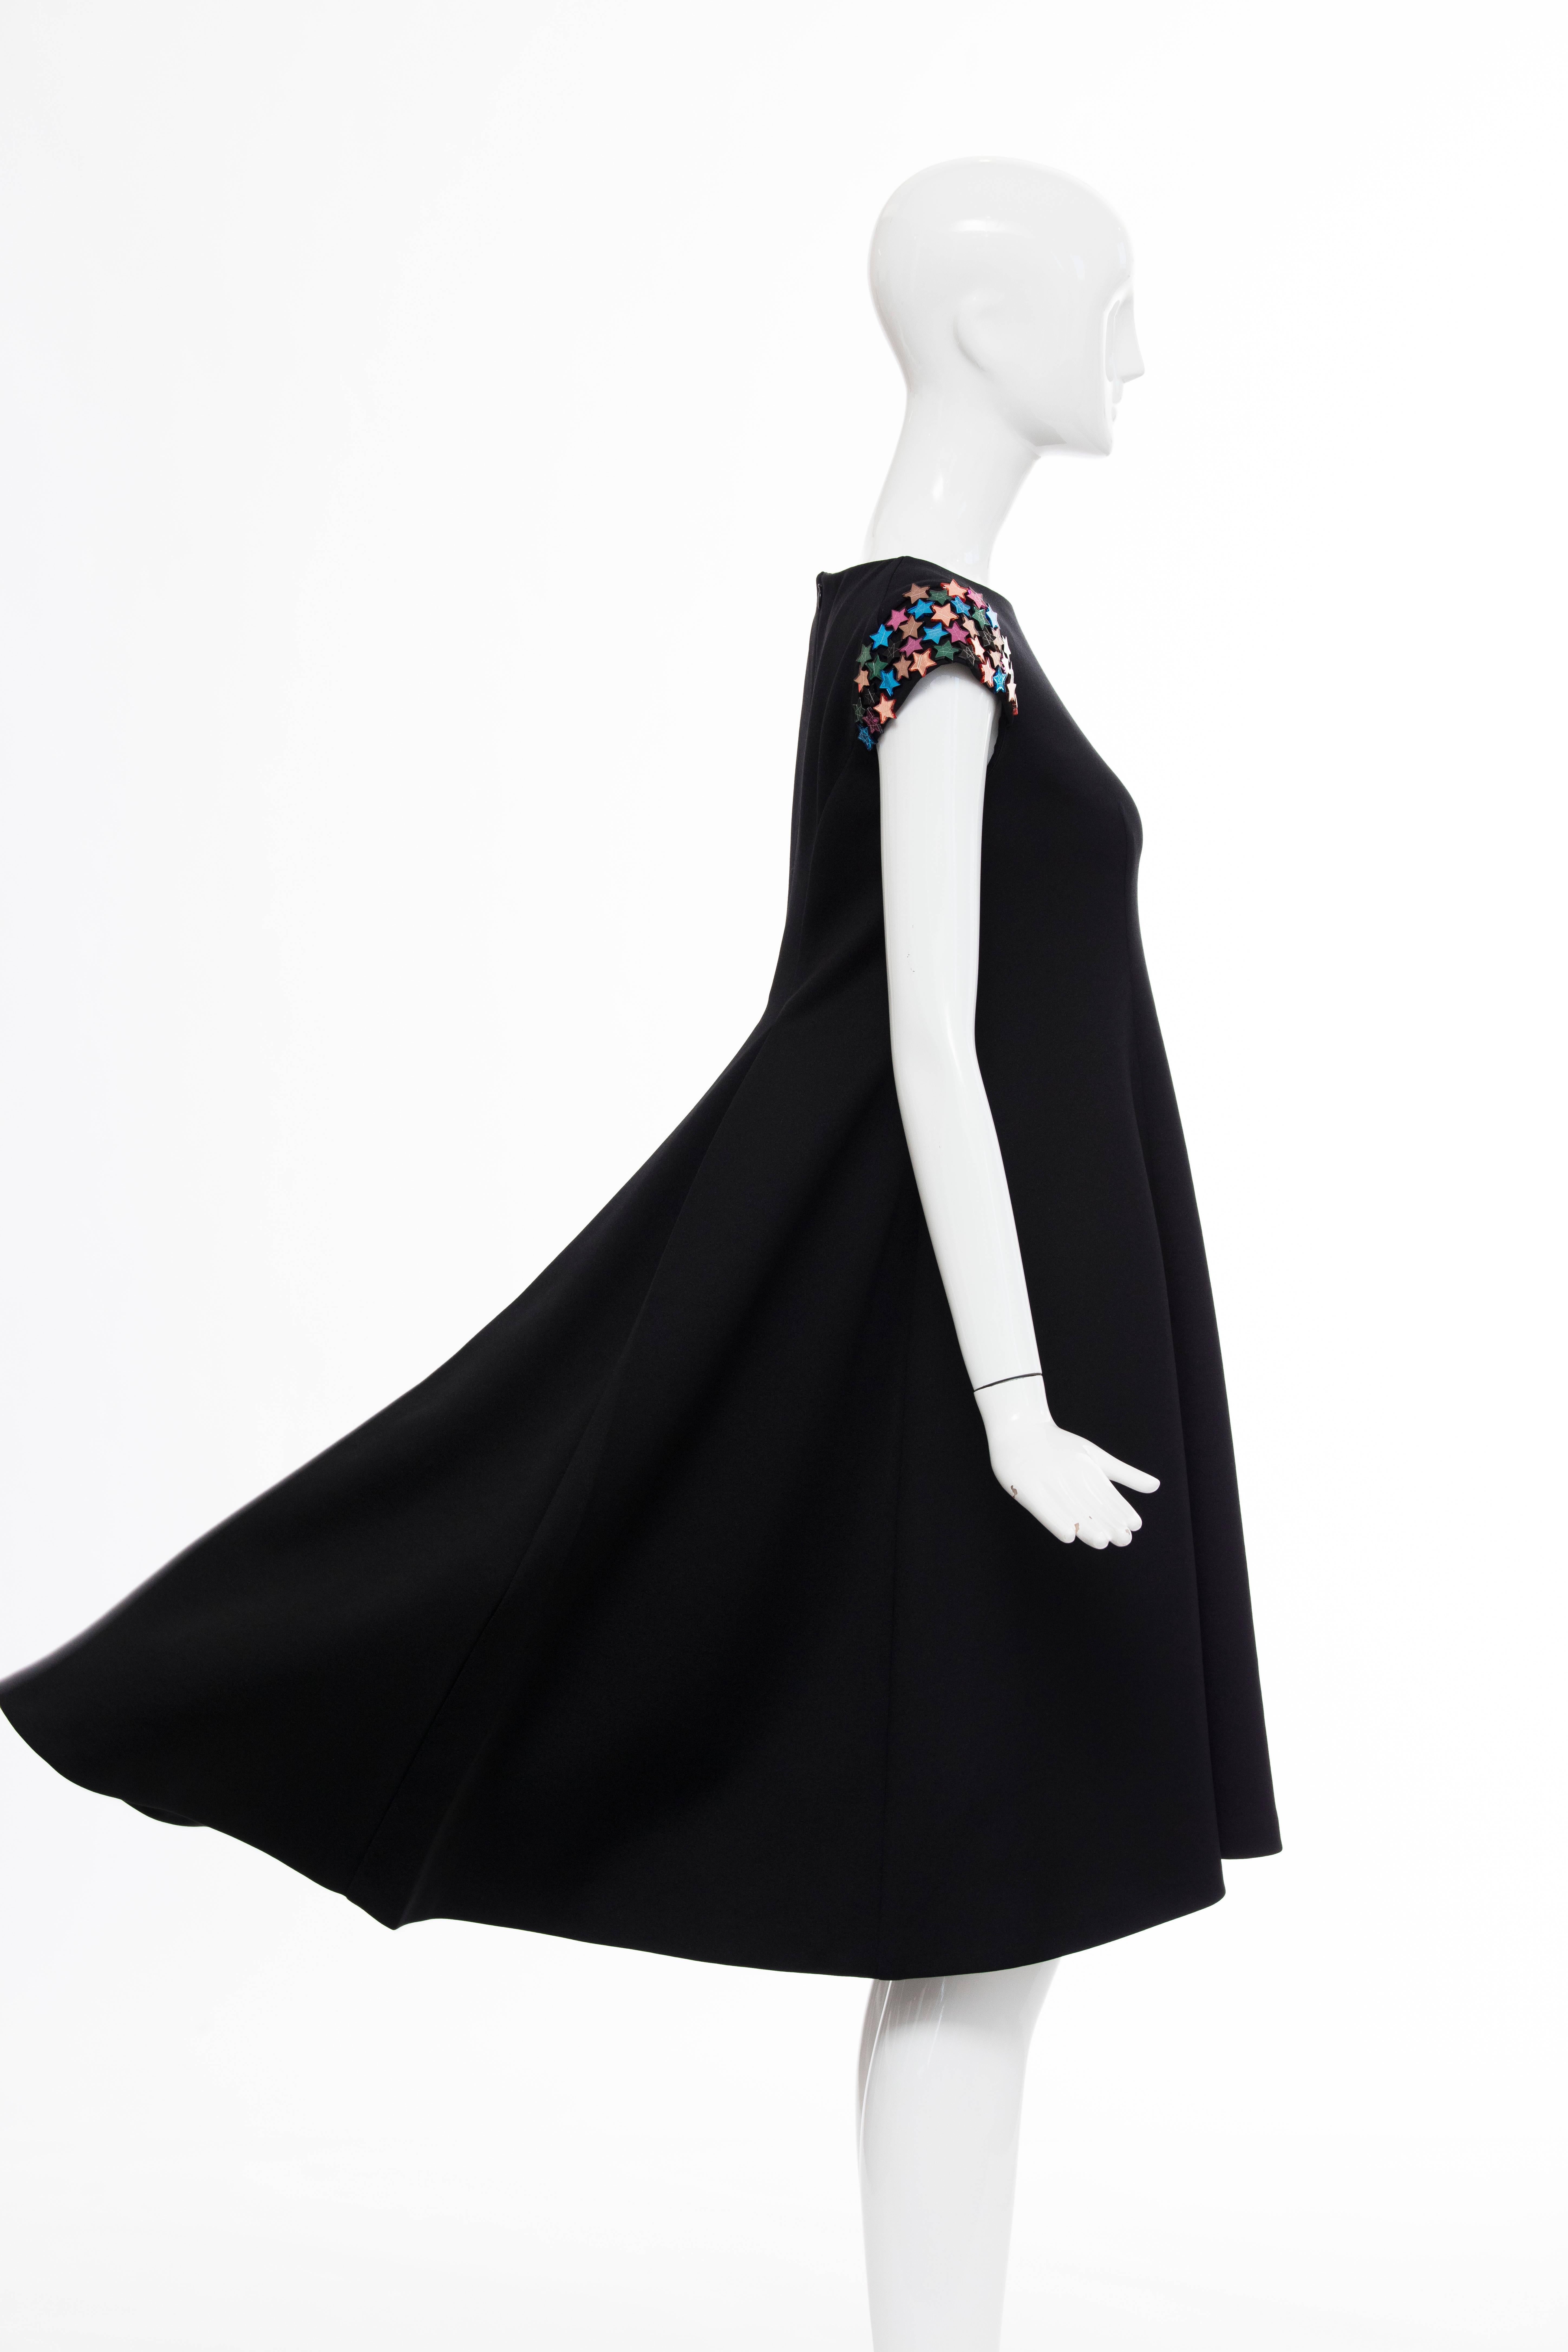 Yves Saint Laurent Black A - Line Dress With Mirrored Stars At Sleeve For Sale 3